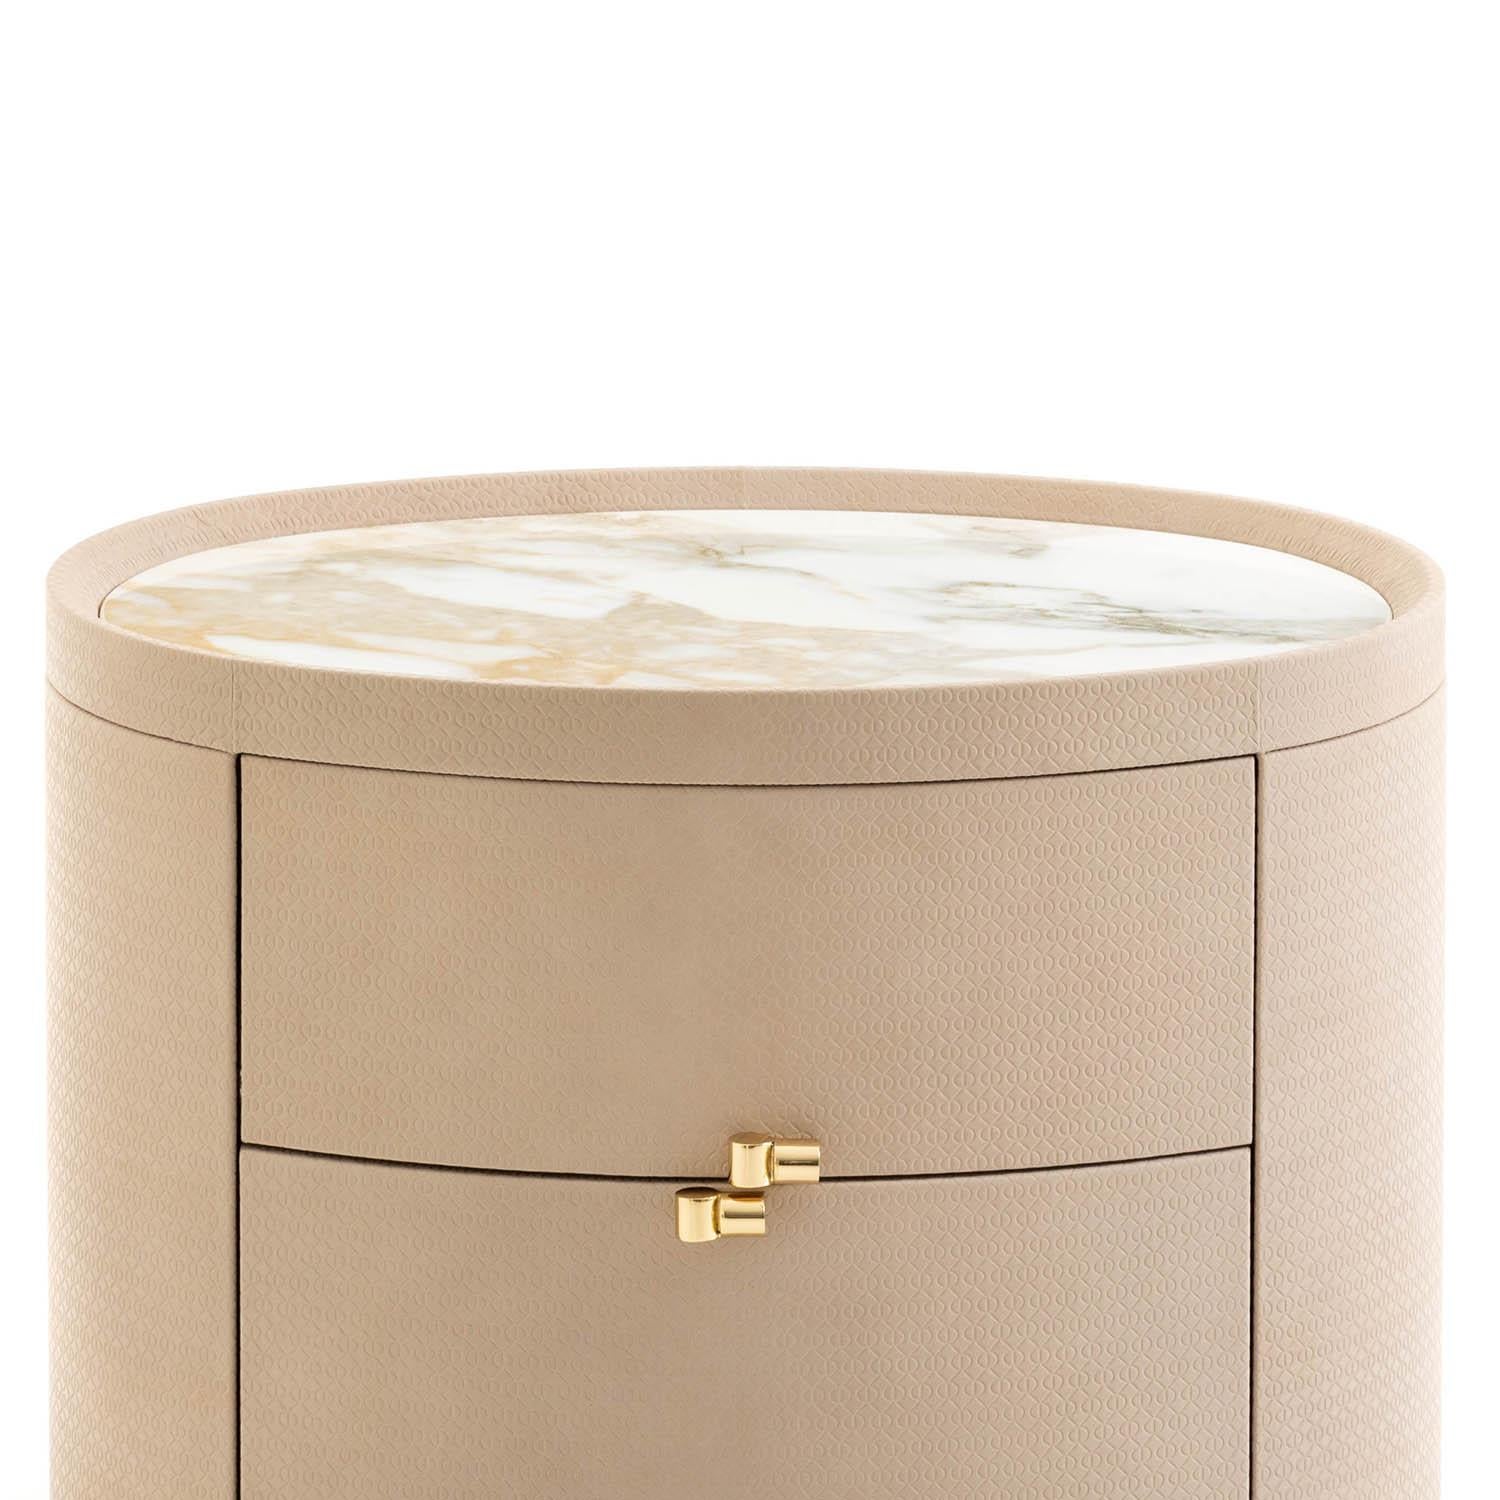 Nightstand chelby with solid wood structure
upholstered and covered with genuine Italian leather.
With Calcutta oro white marble top and with solid brass 
base in pollished finish. Chest with 2 drawers with solid 
brass handles in polished